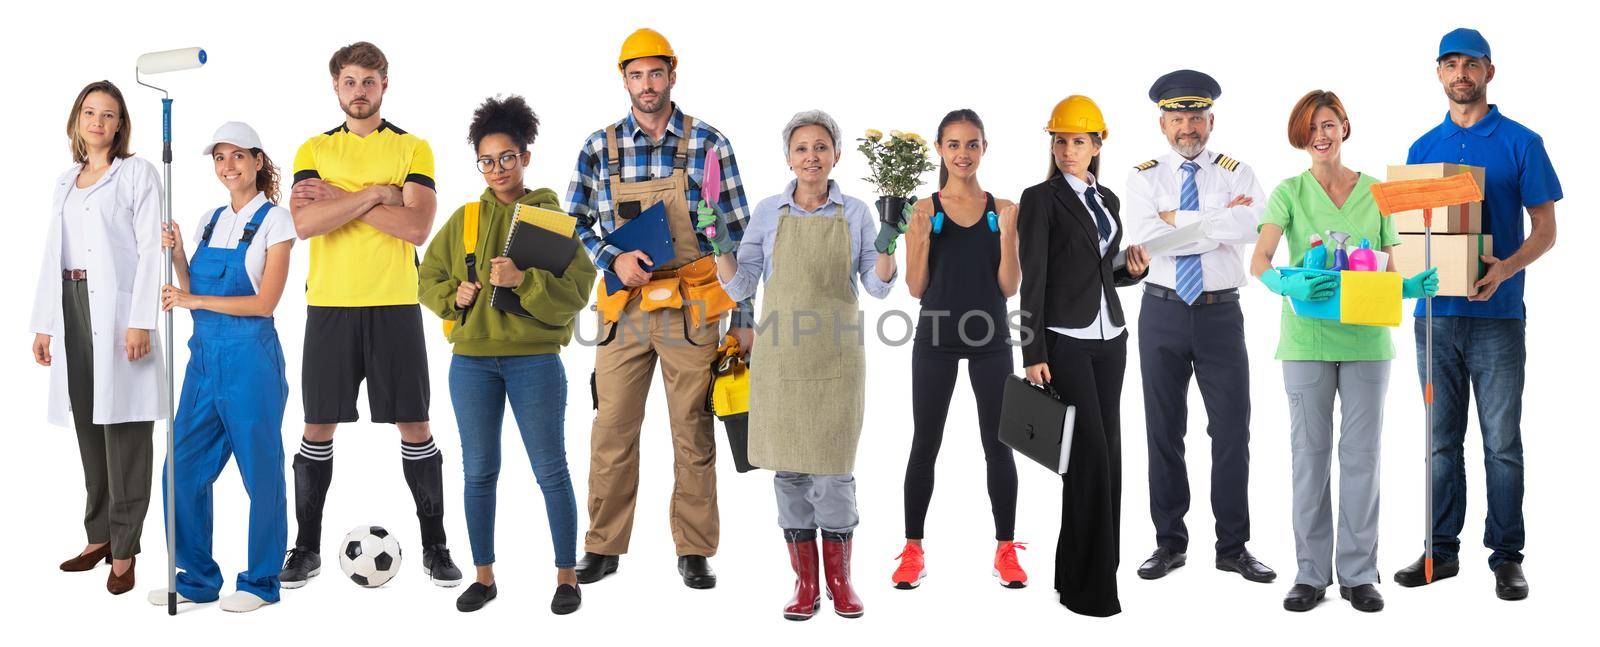 Diverse professions people on white by ALotOfPeople